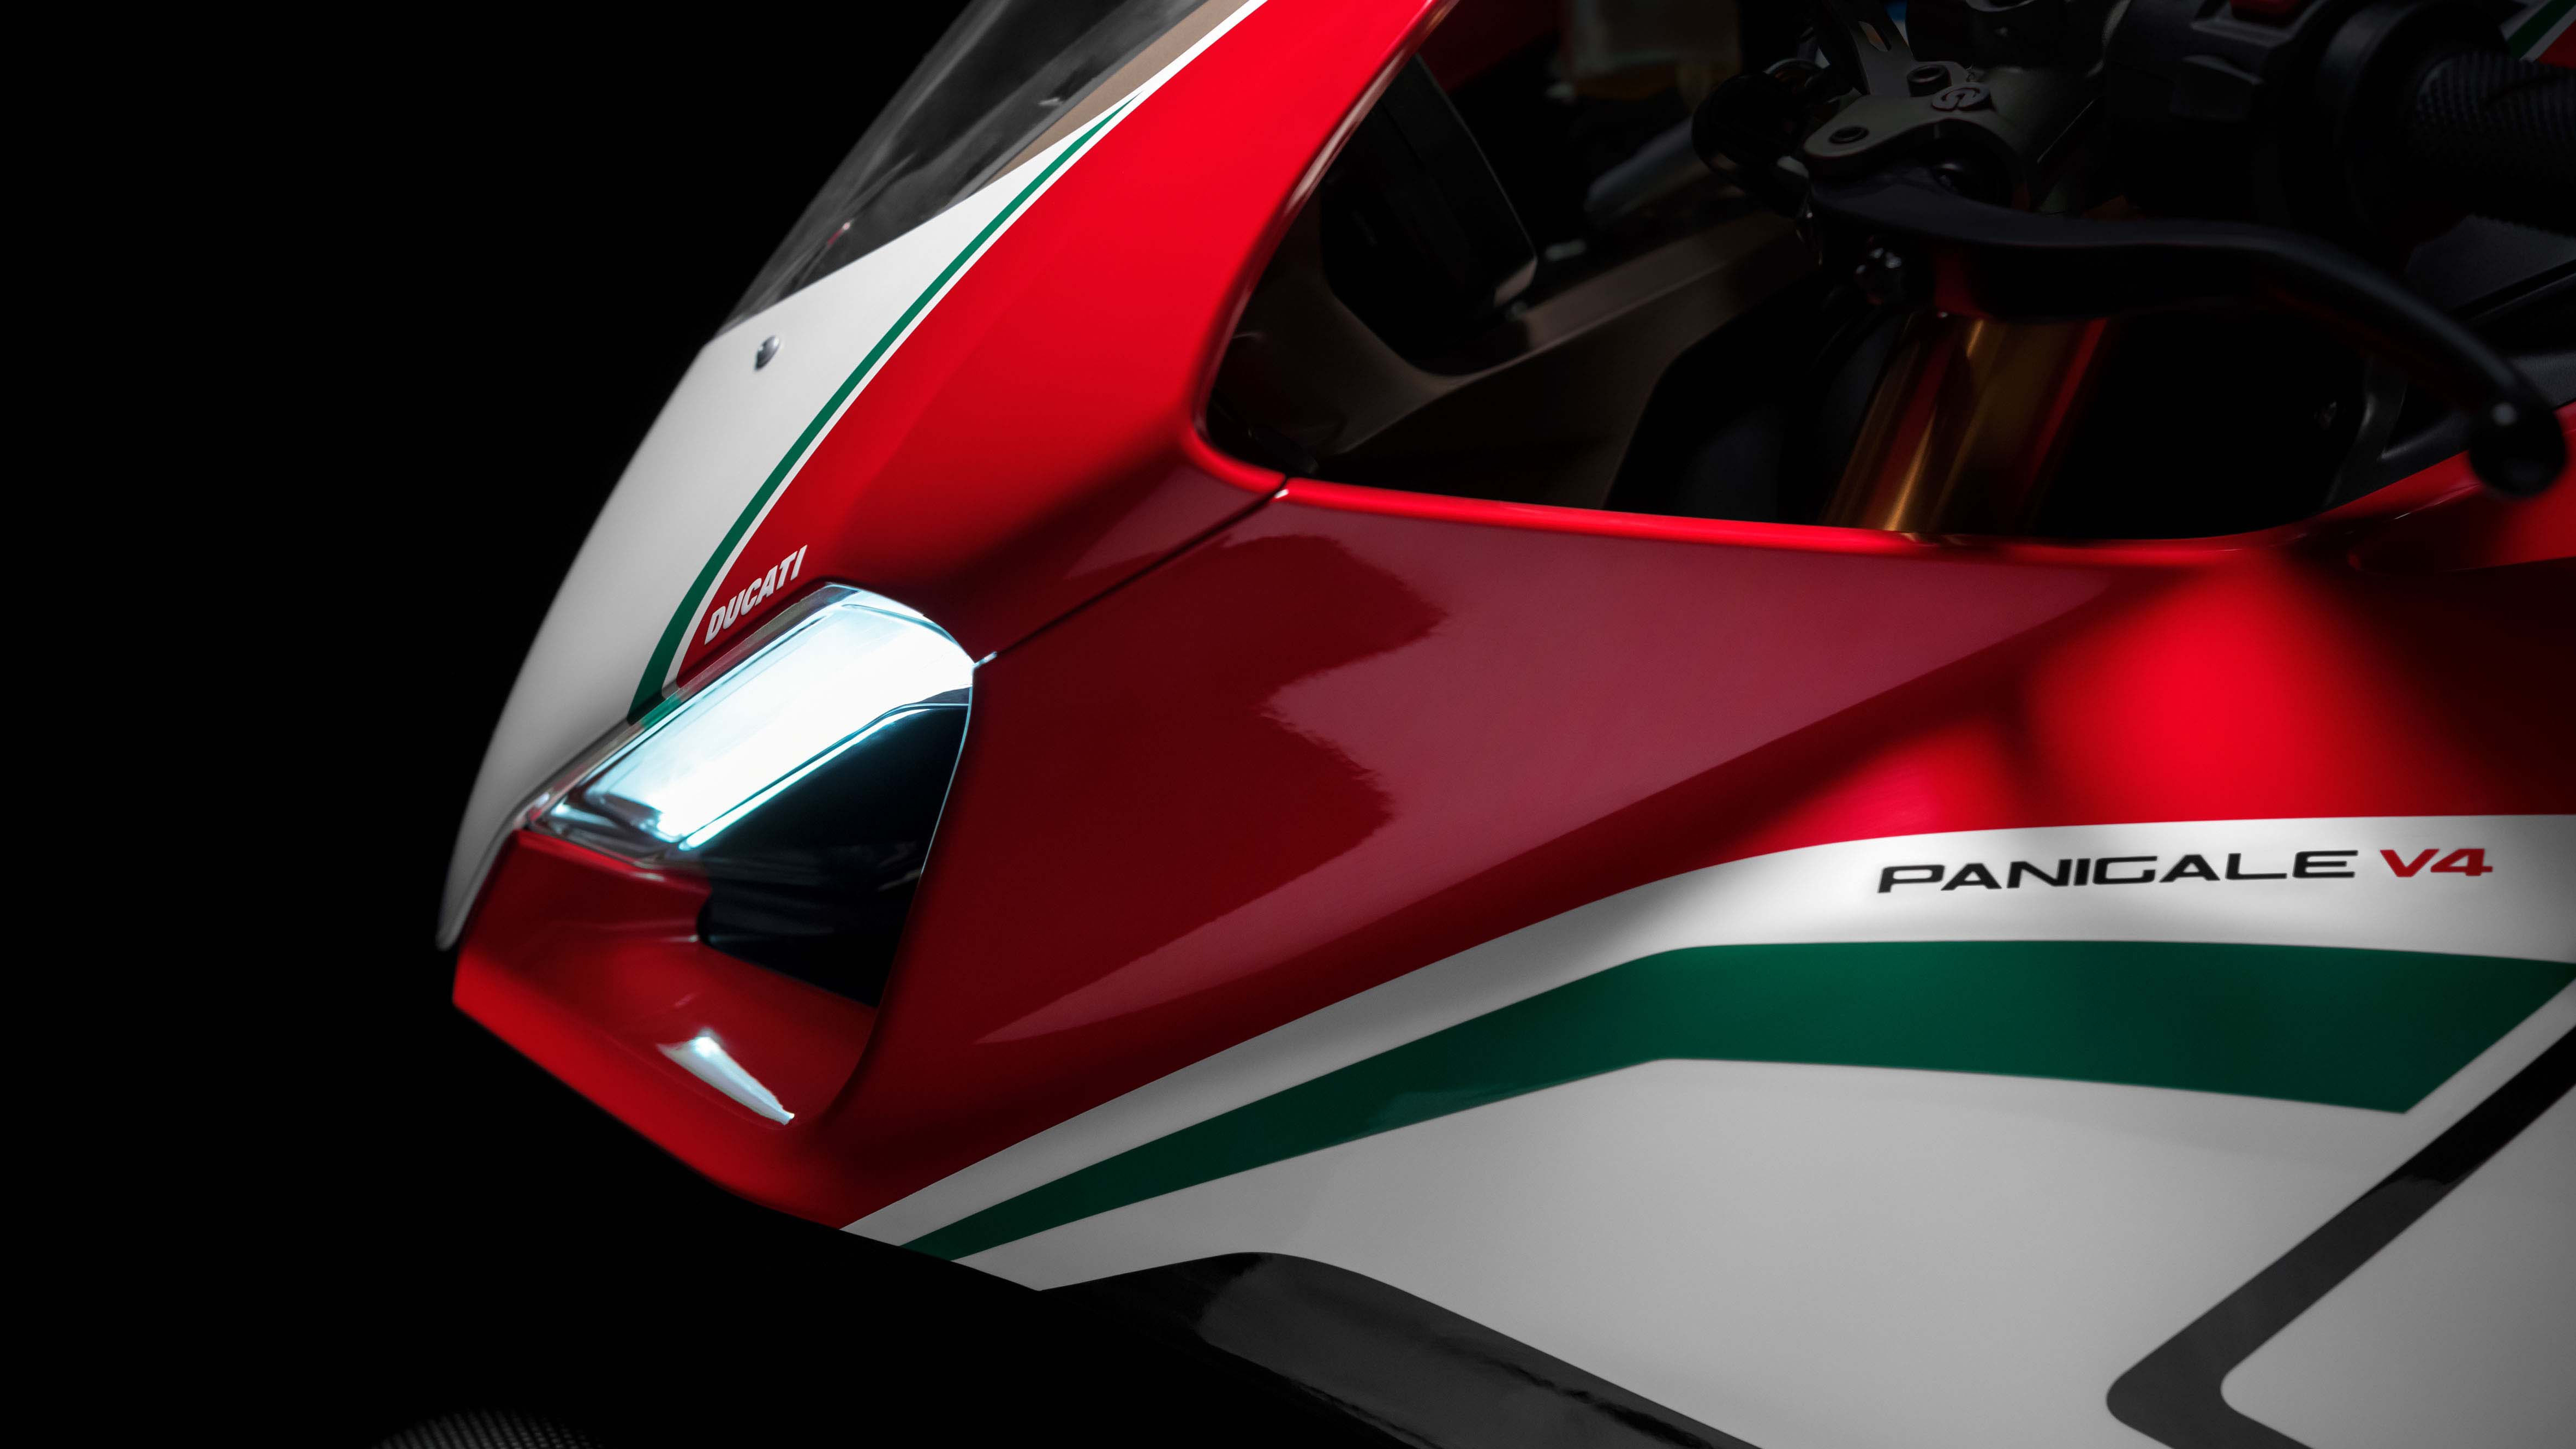 Ducati Panigale V4 Speciale 4K 2018 Wallpapers